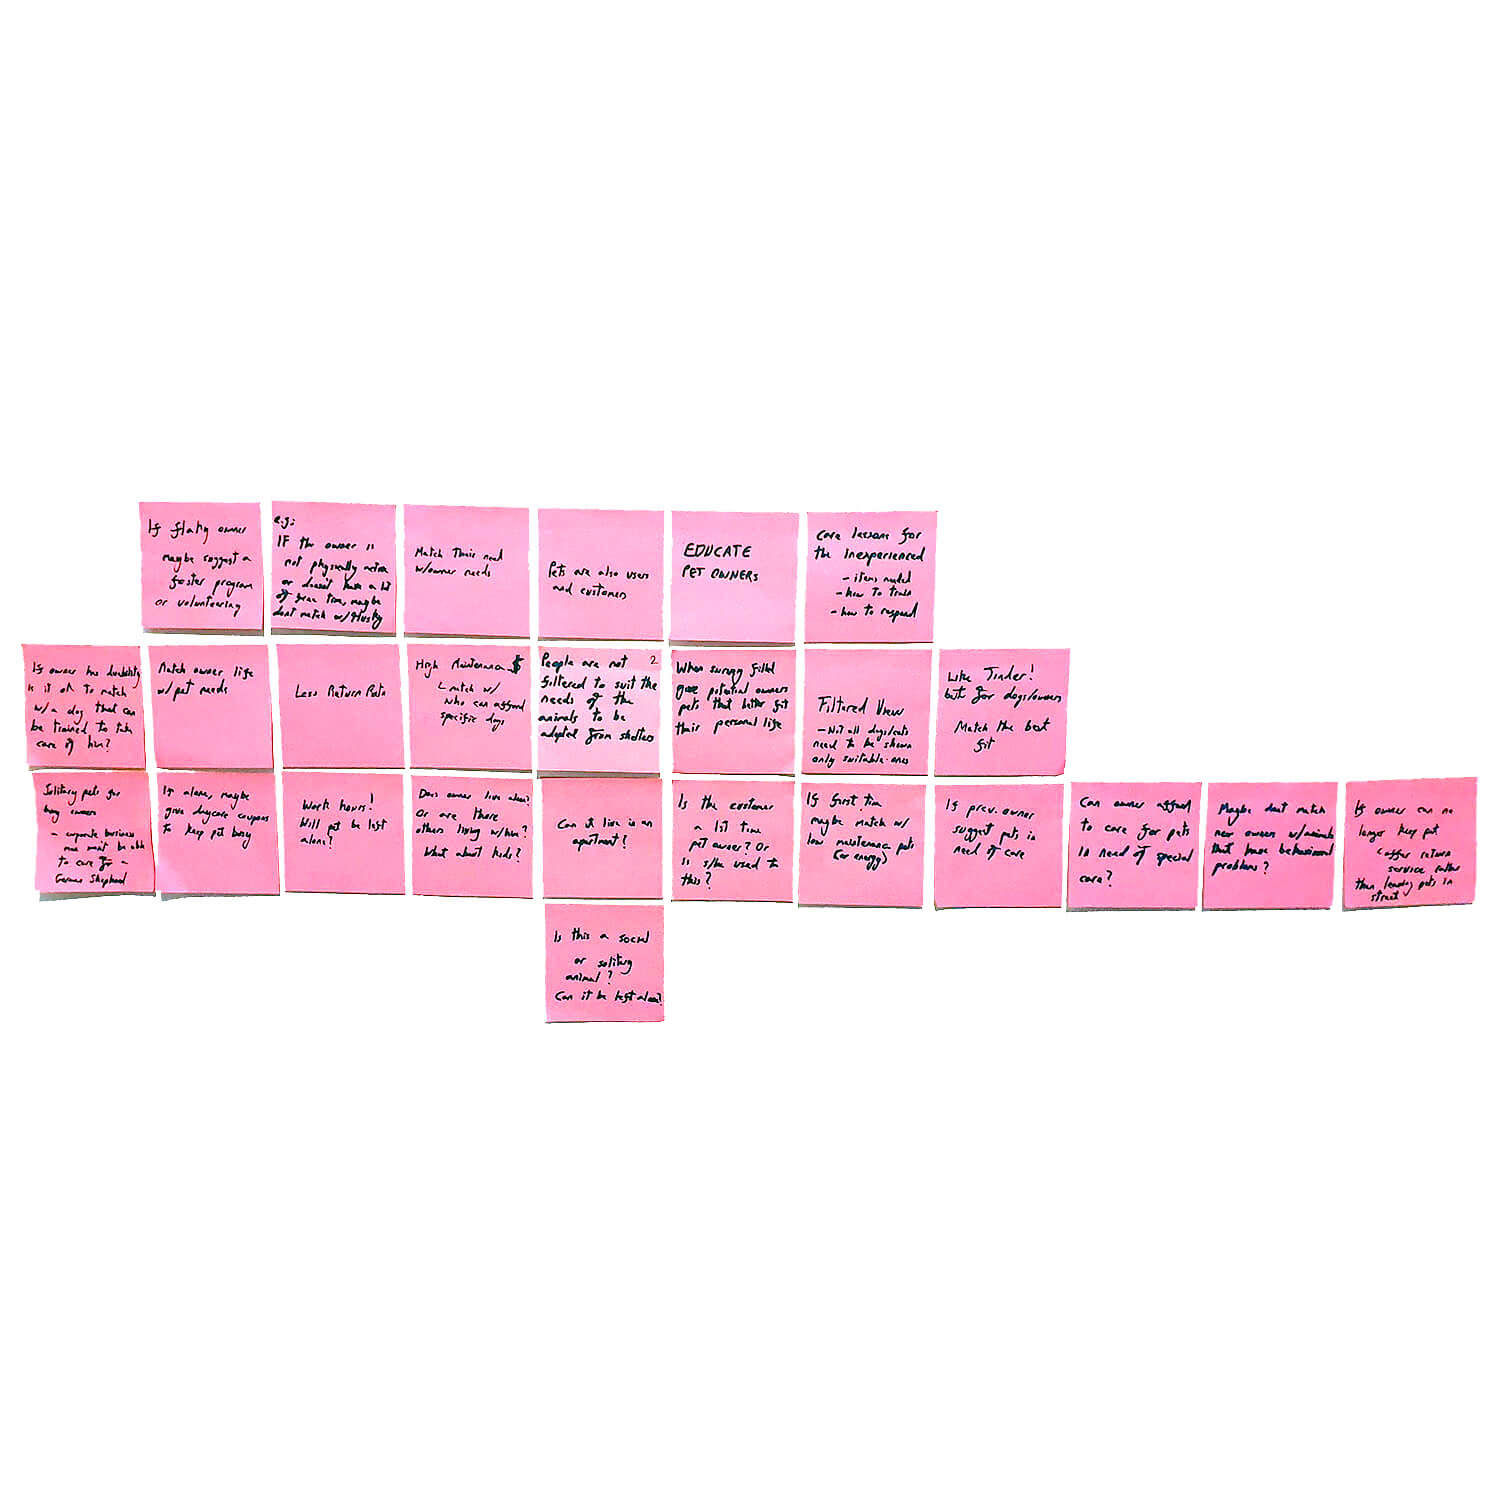 Post-It Notes Addressing Issues Associated with the Design Problem Statement 1